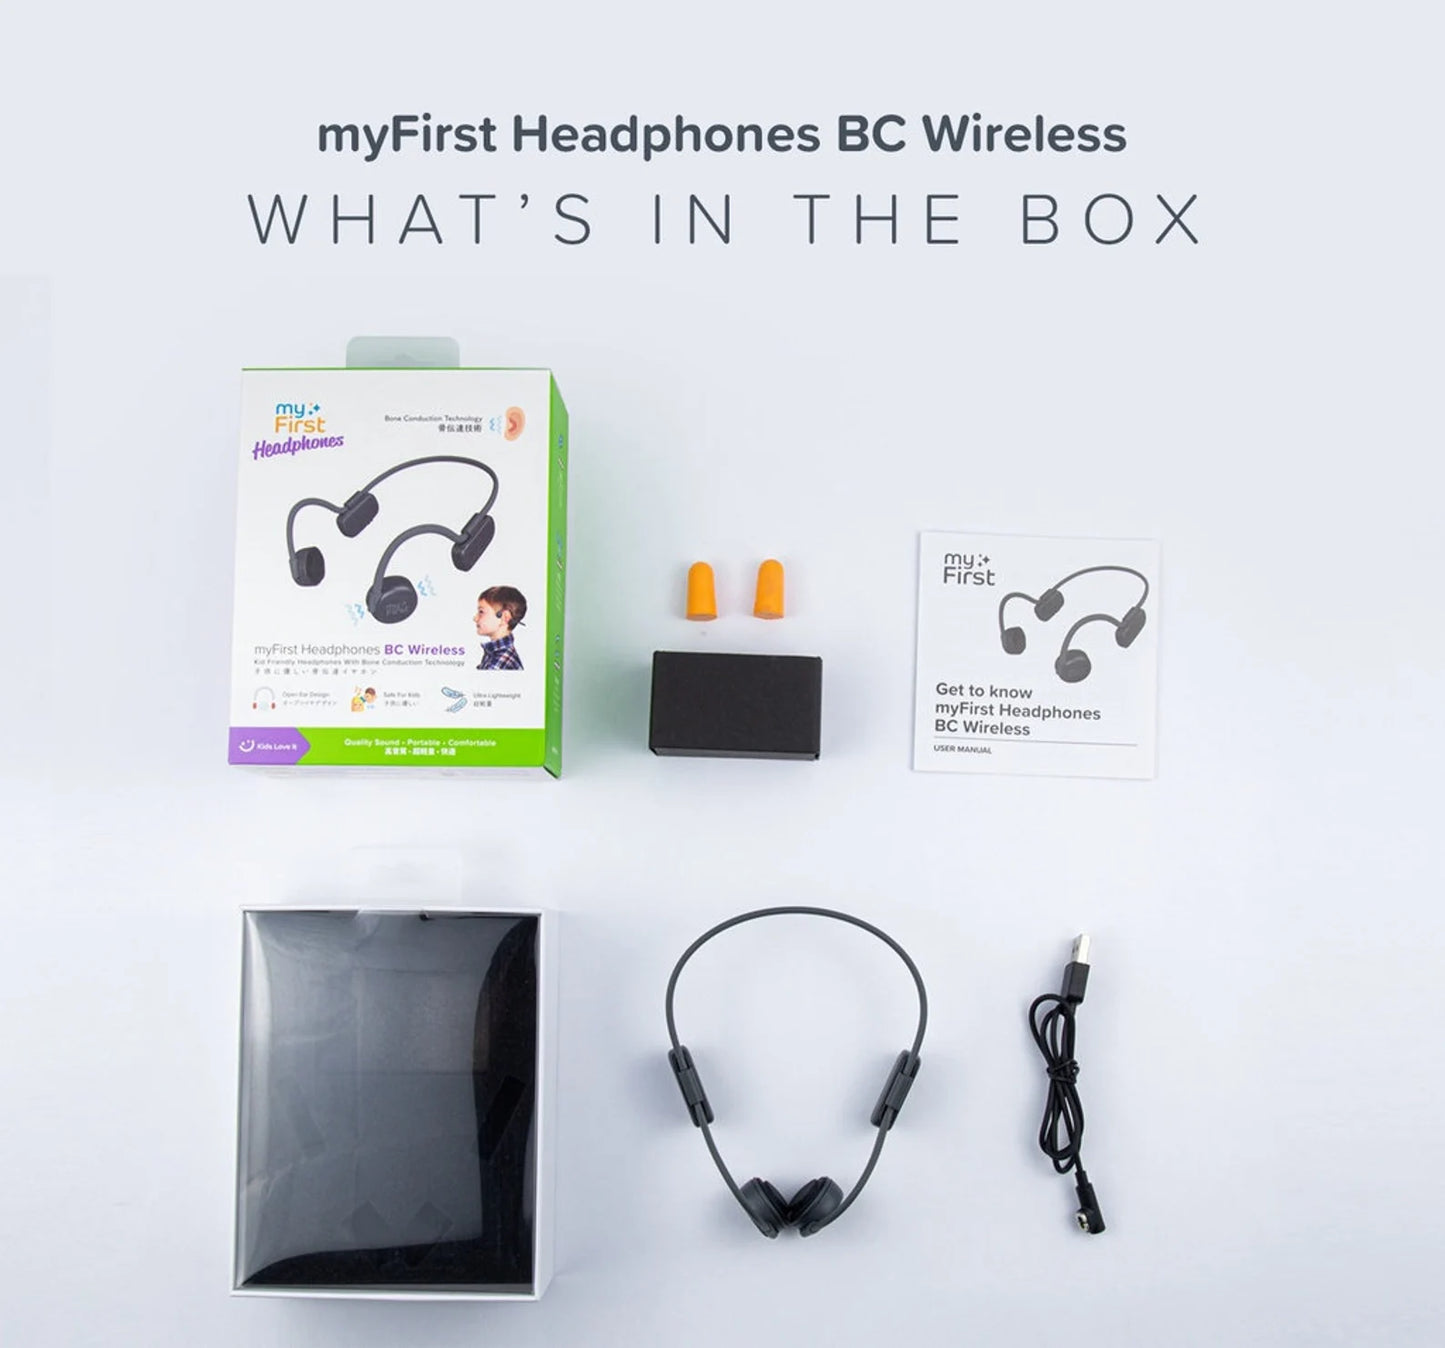 myfirst bc wireless headphones what is in the box